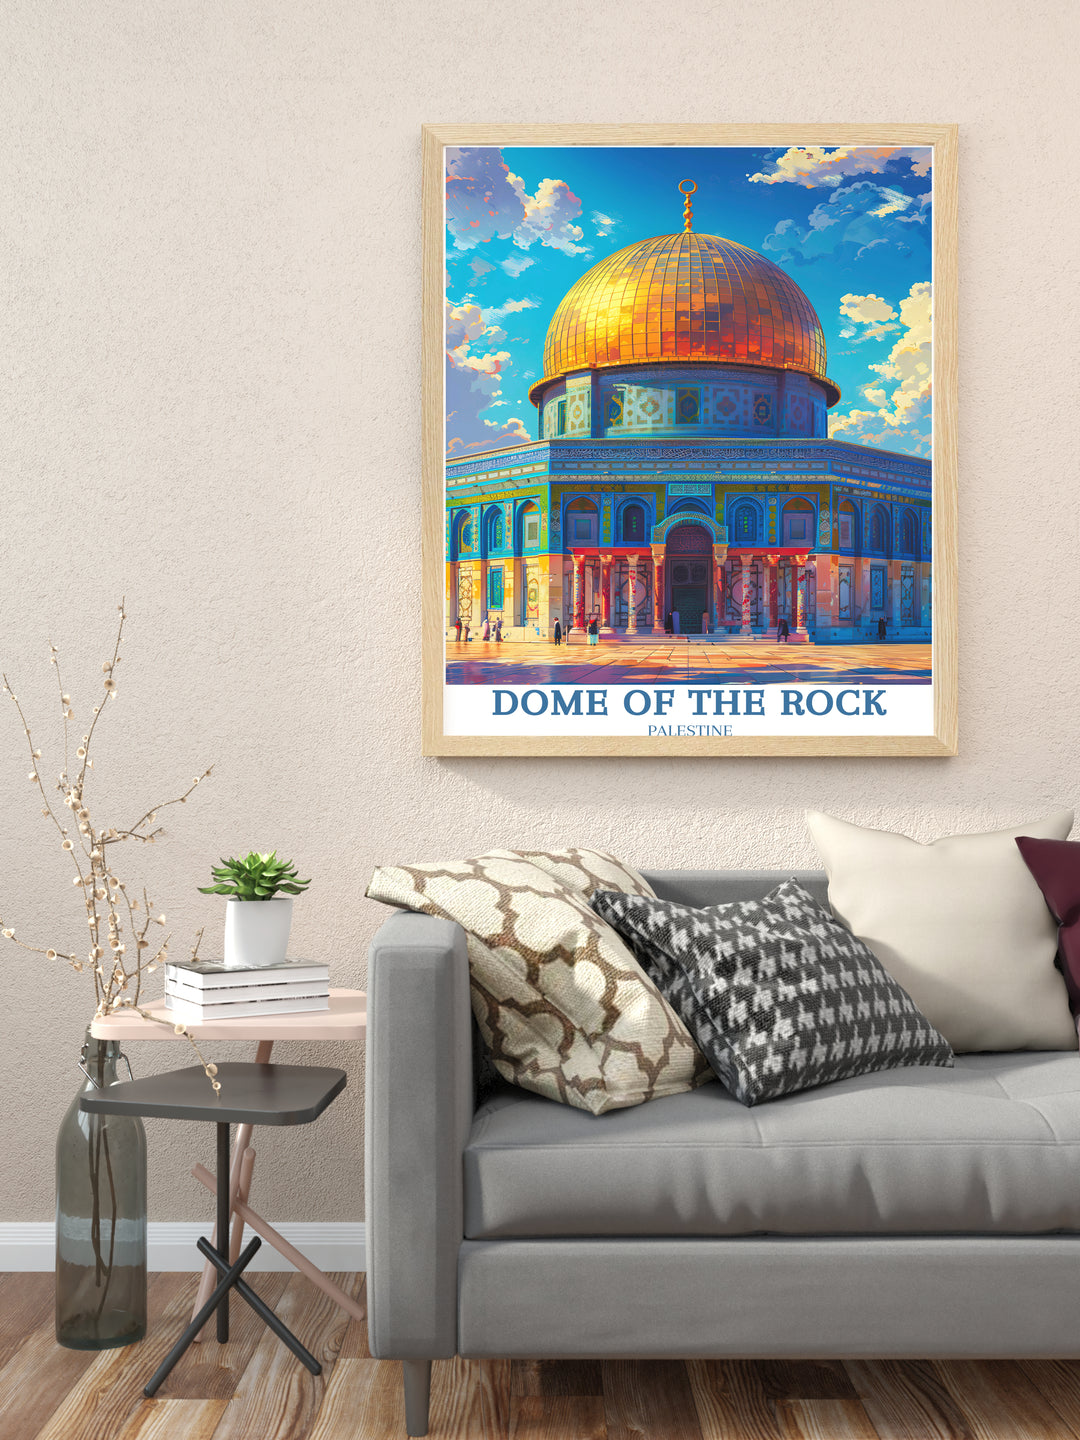 Dome of the Rock Vintage Poster - Iconic Palestine Landmarks